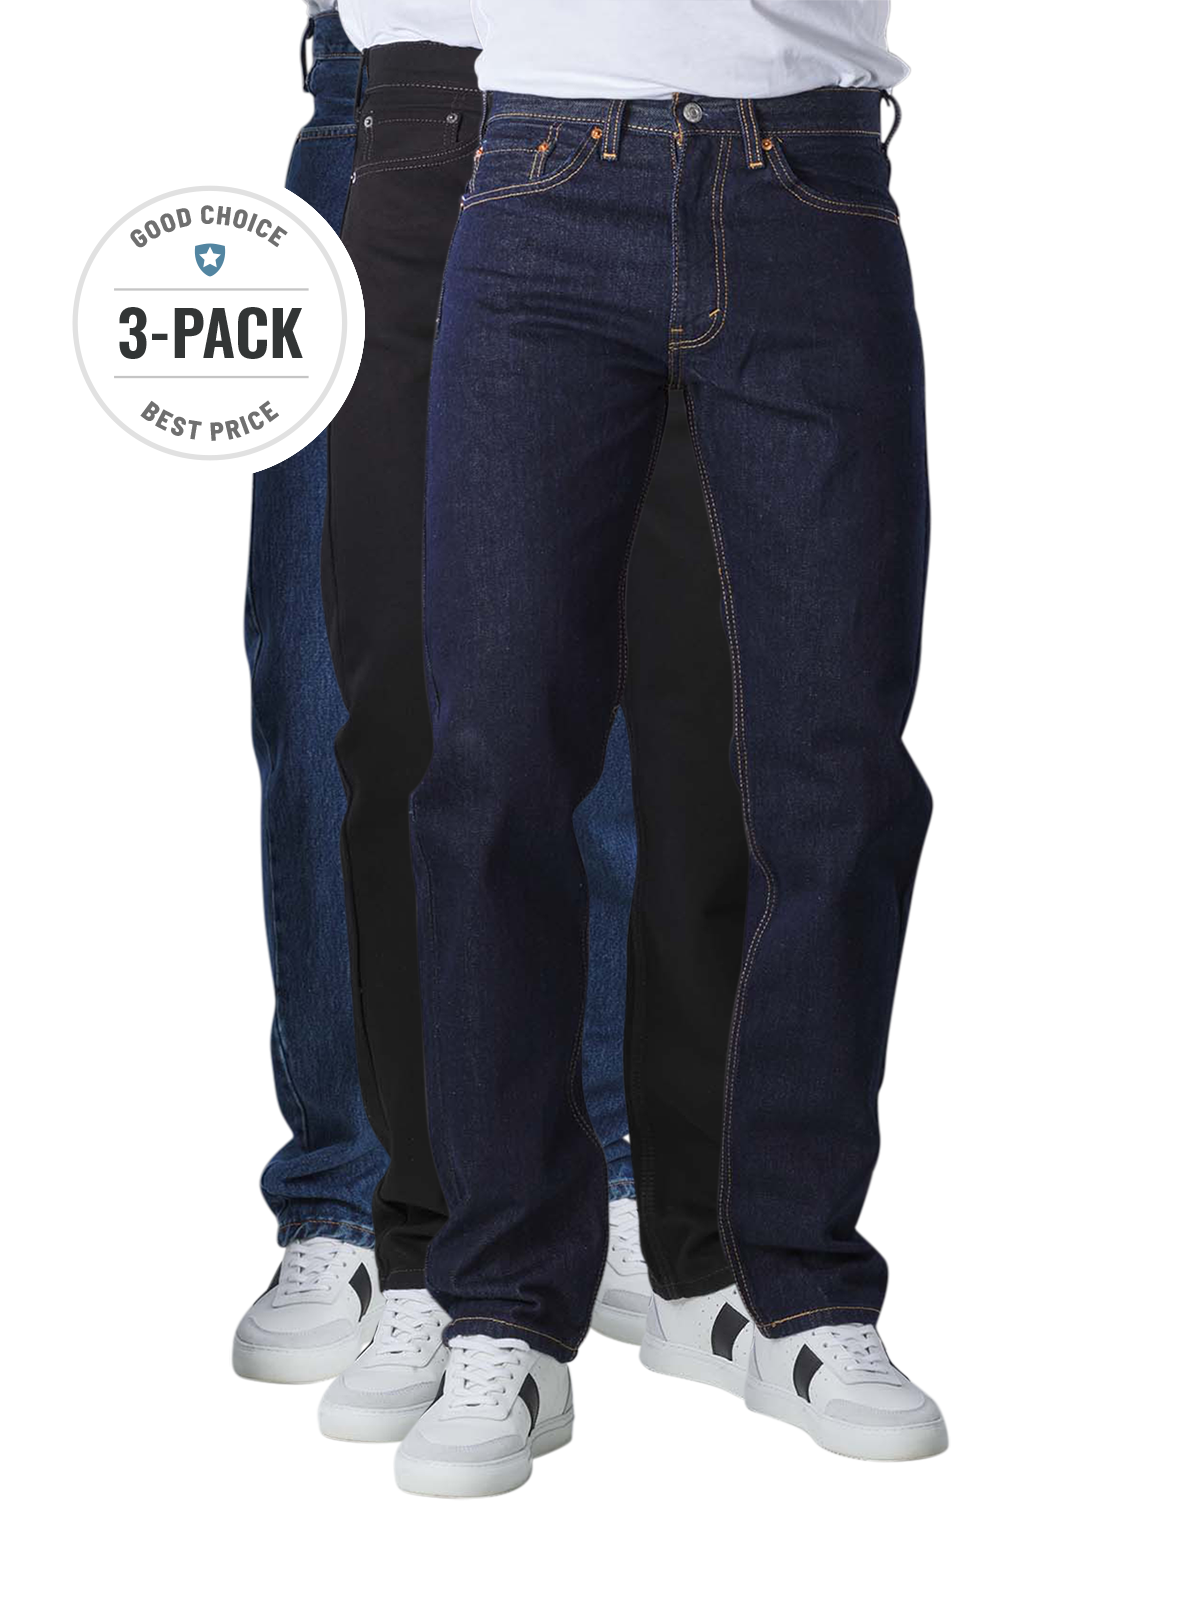 Levi's 505 Jeans Straight Fit stonewash/rinse/black Trio Levi's Men's Jeans  | Free Shipping on  - SIMPLY LOOK GOOD